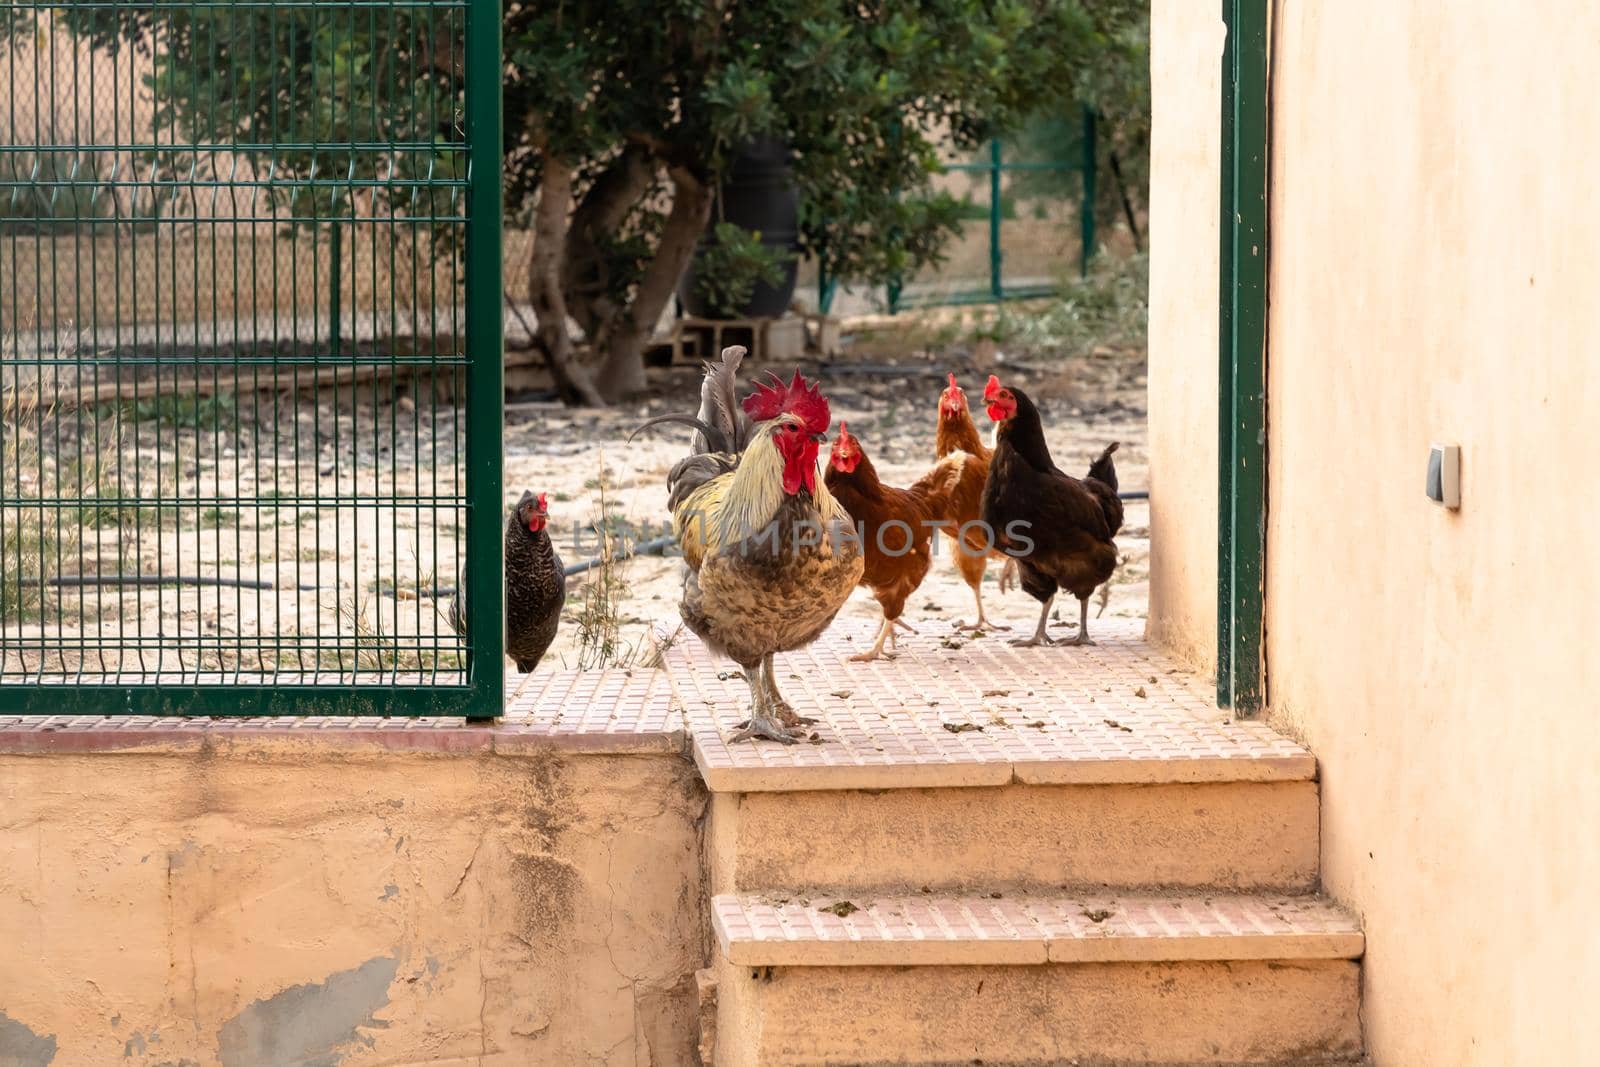 Black cock walks around the chicken coop surrounded by other chickens by Milanchikov